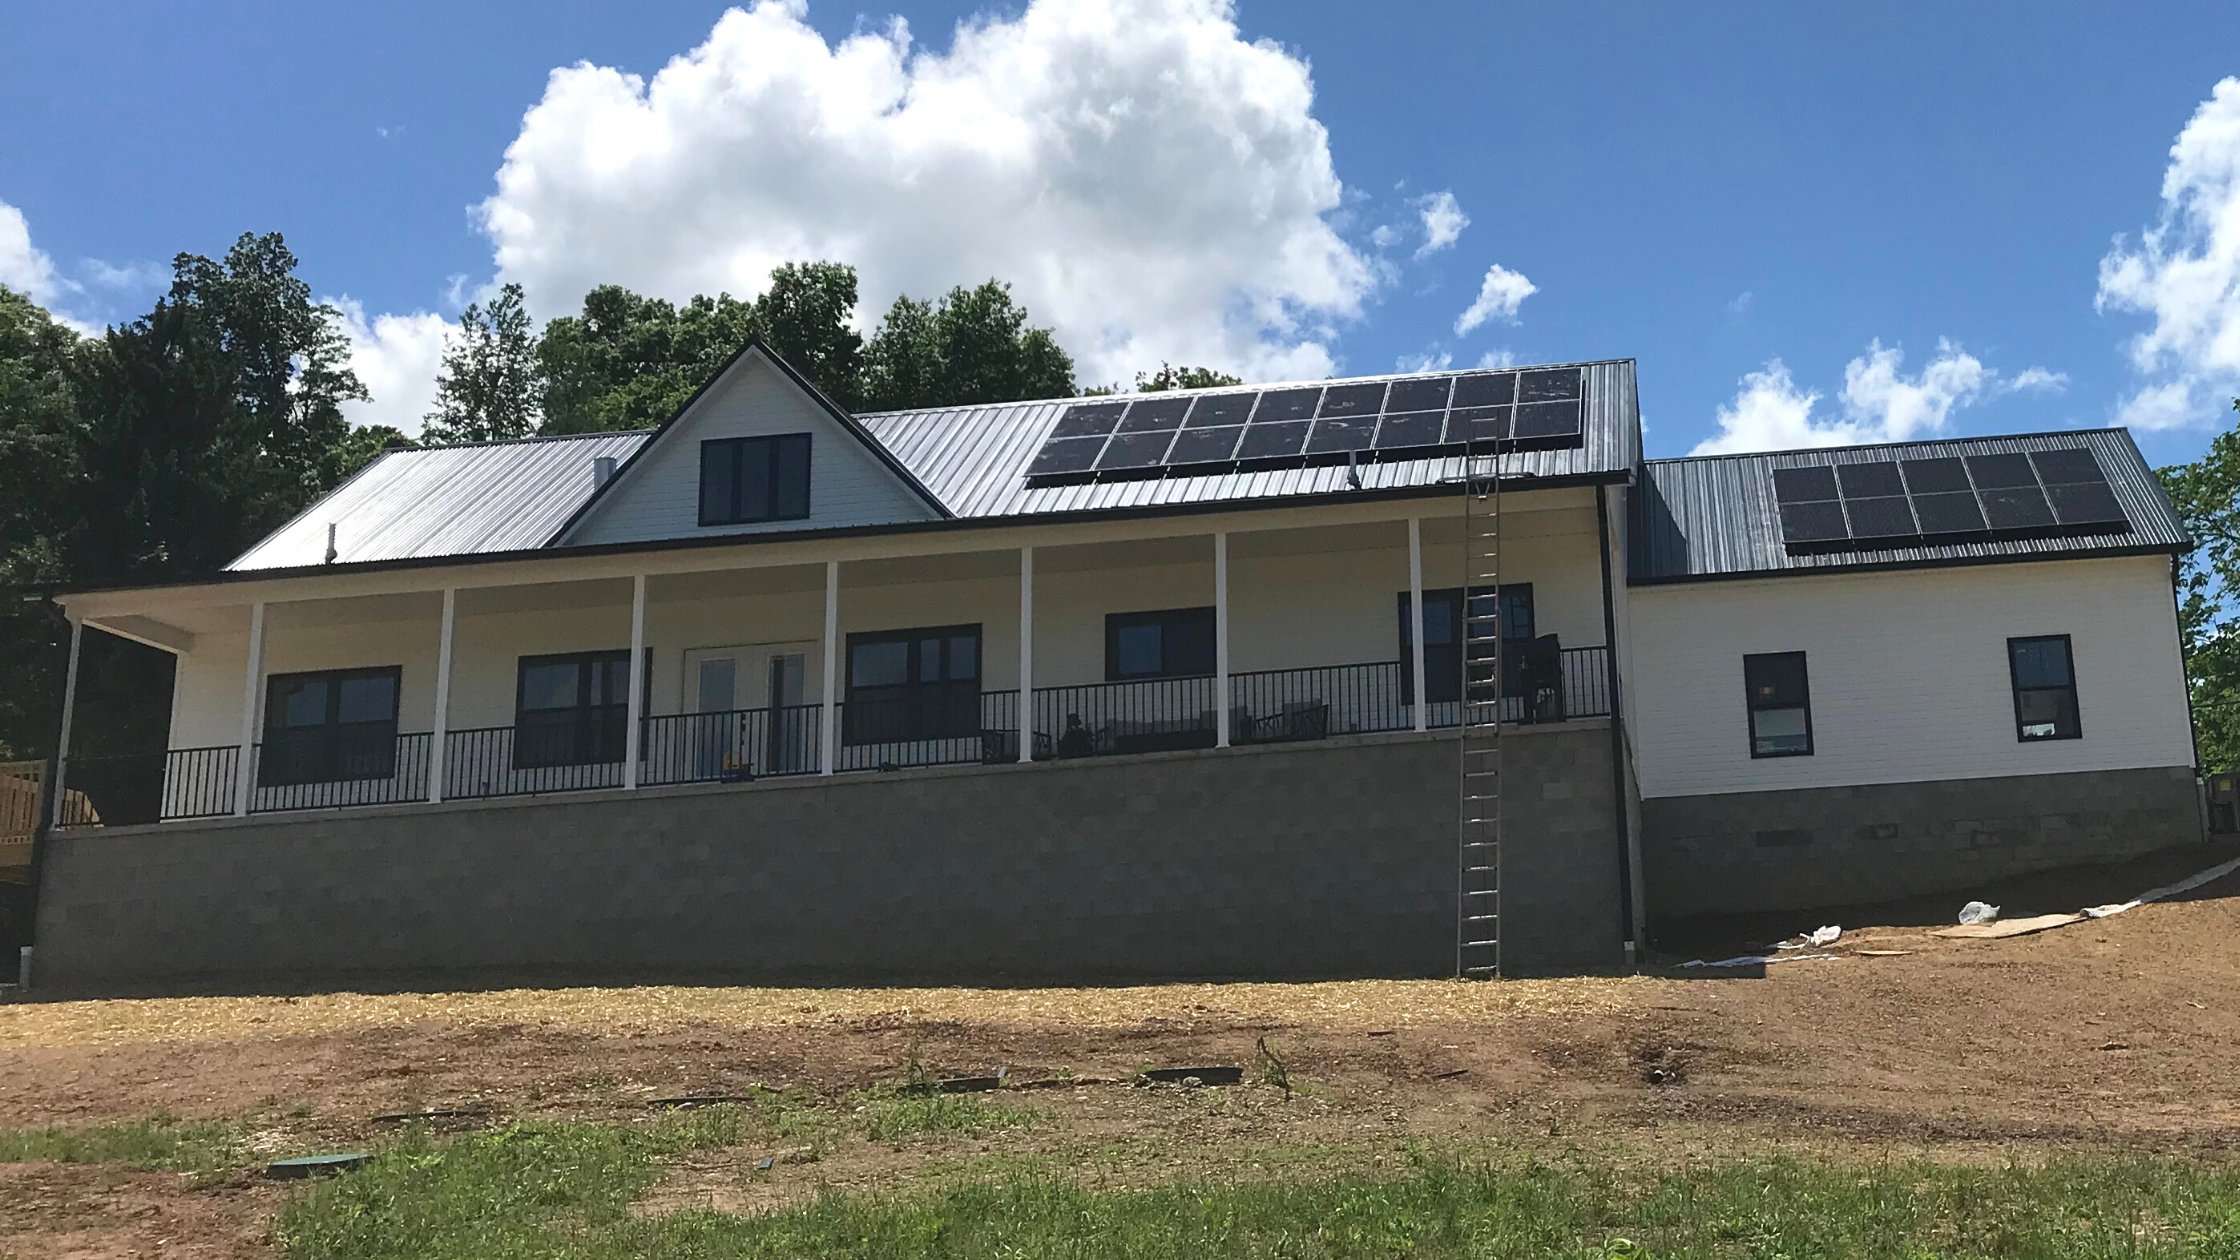 Case Study: Giving the Gift of Solar